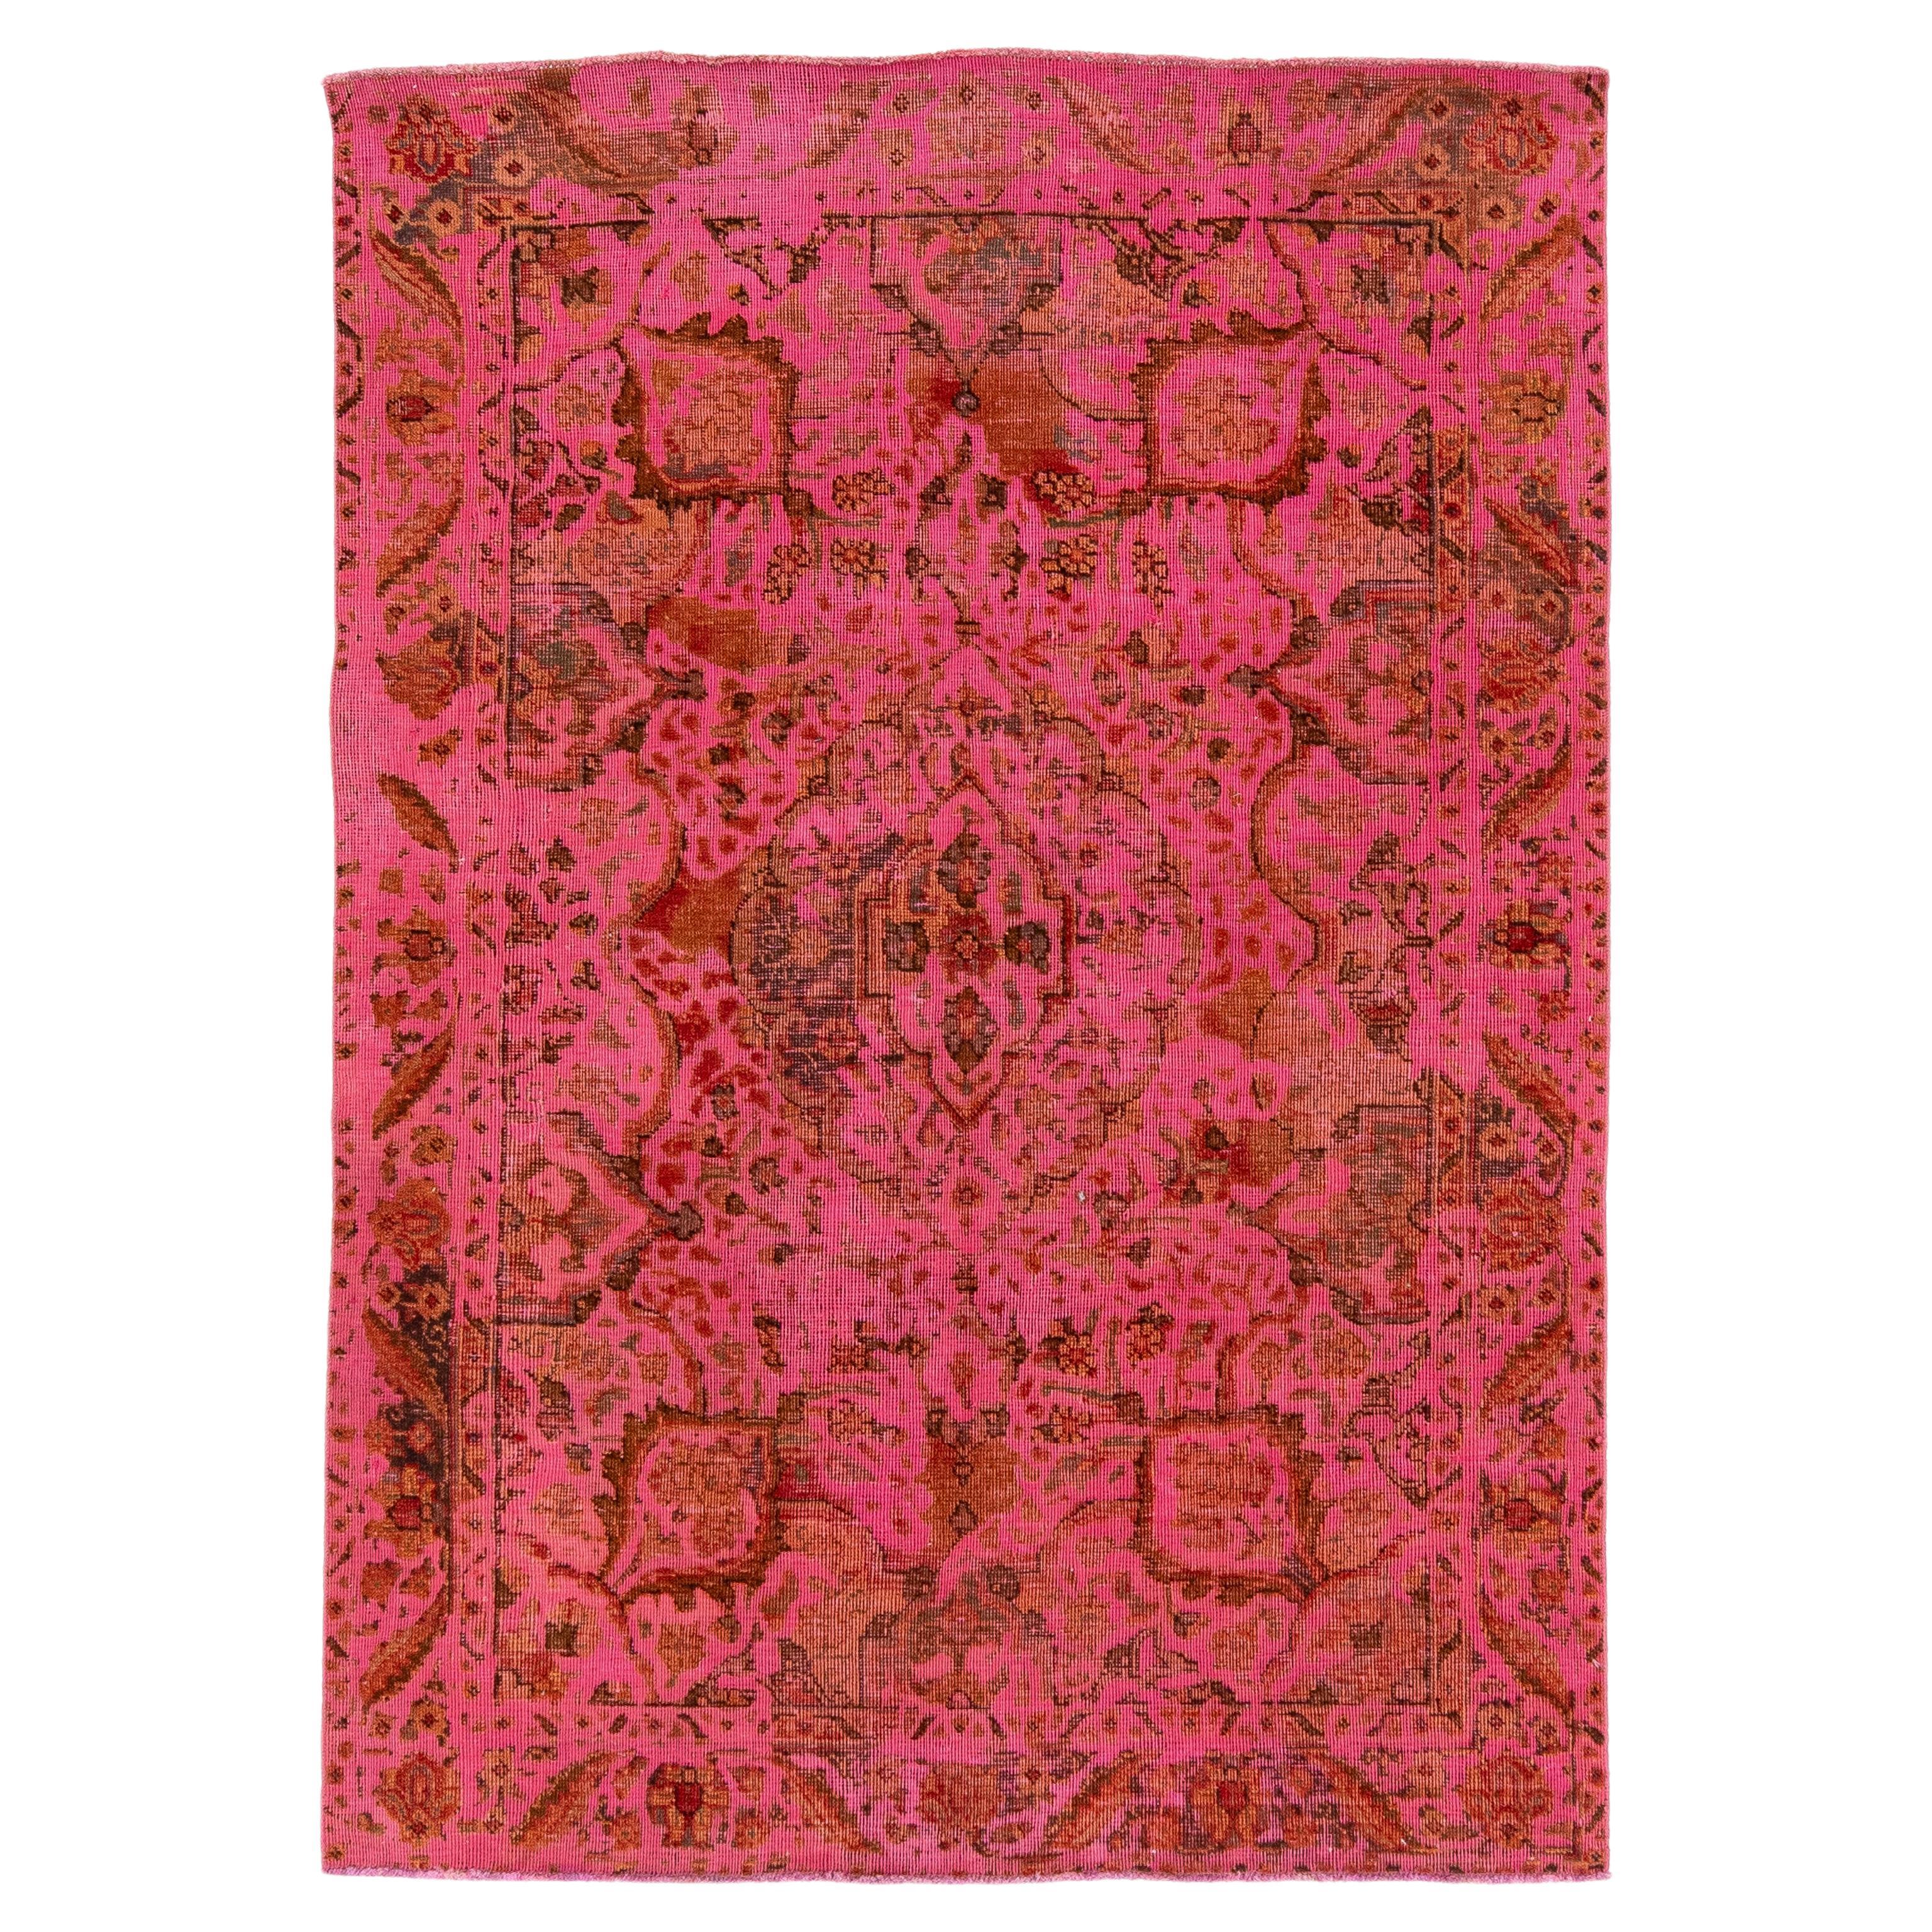 Vintage Overdyed Persian Wool Rug In Pink With Floral Motif